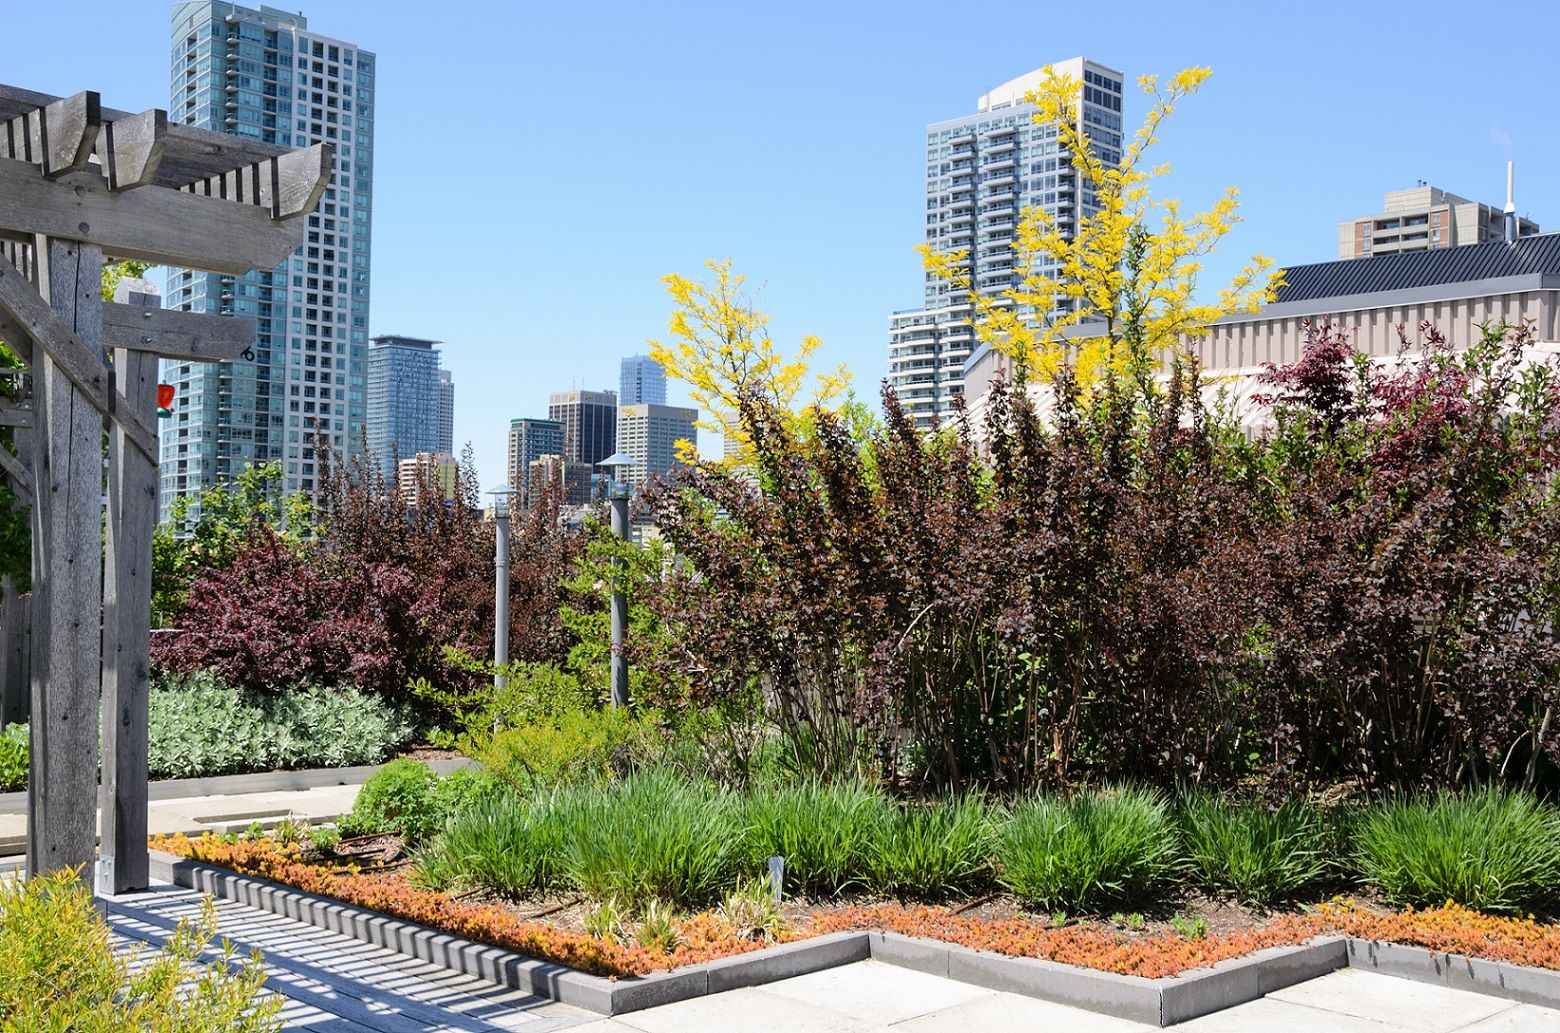 A green roof against a skyline - incorporating greenery into cities is one way we can embed nature-based solutions into infrastructure design.